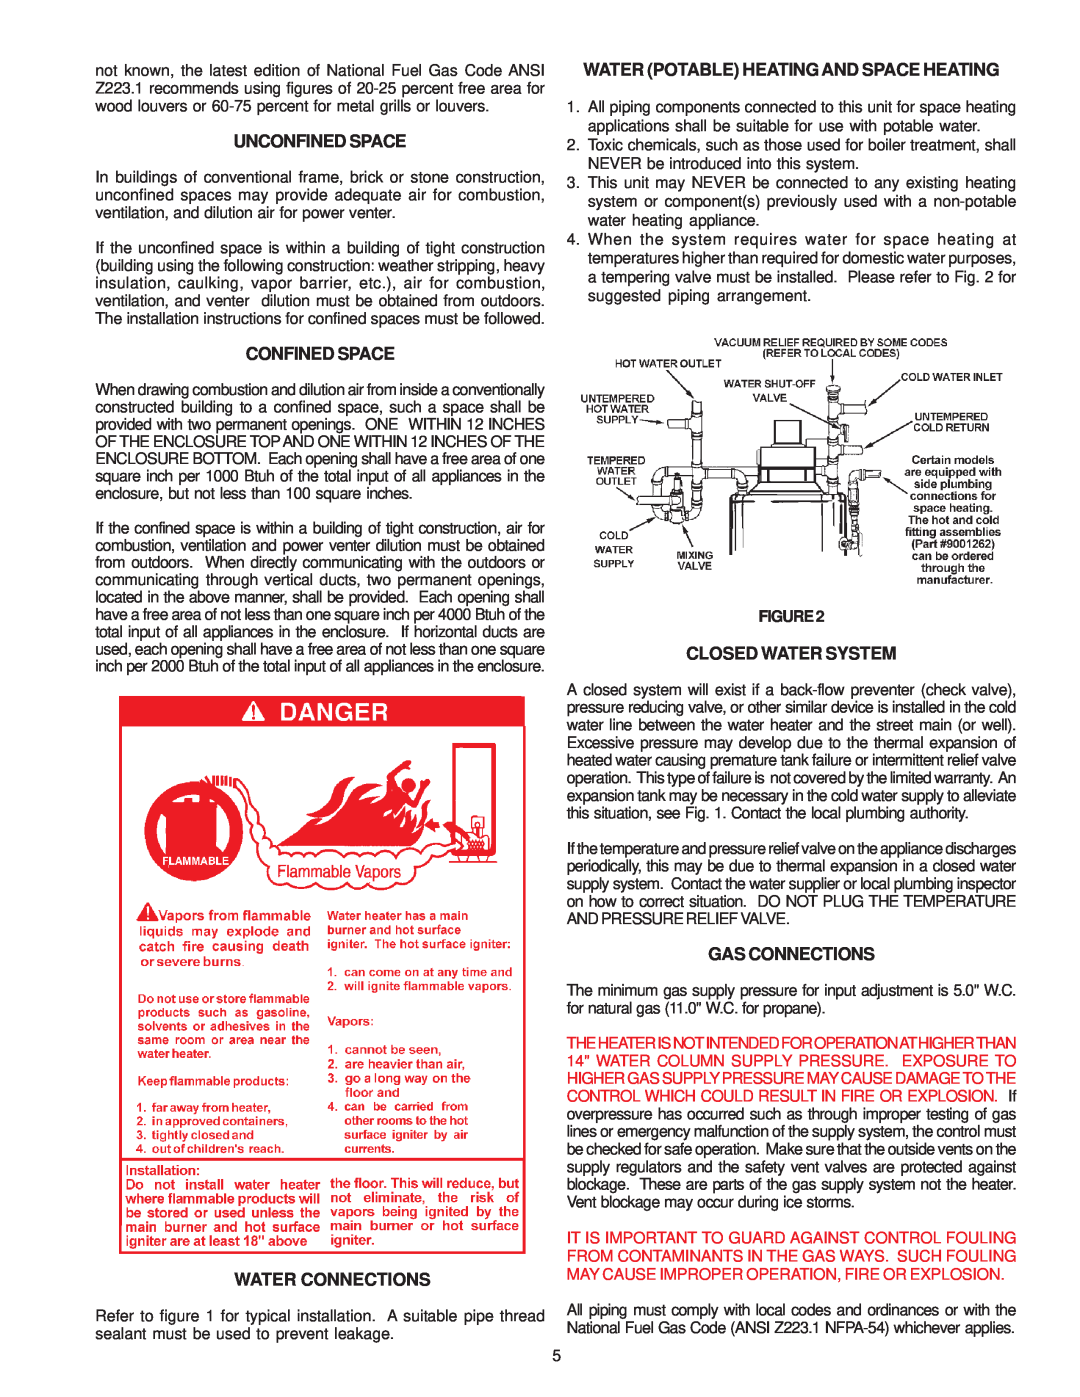 A.O. Smith GPS-75 owner manual Unconfined Space, Water Potable Heating And Space Heating, Confined Space, Water Connections 